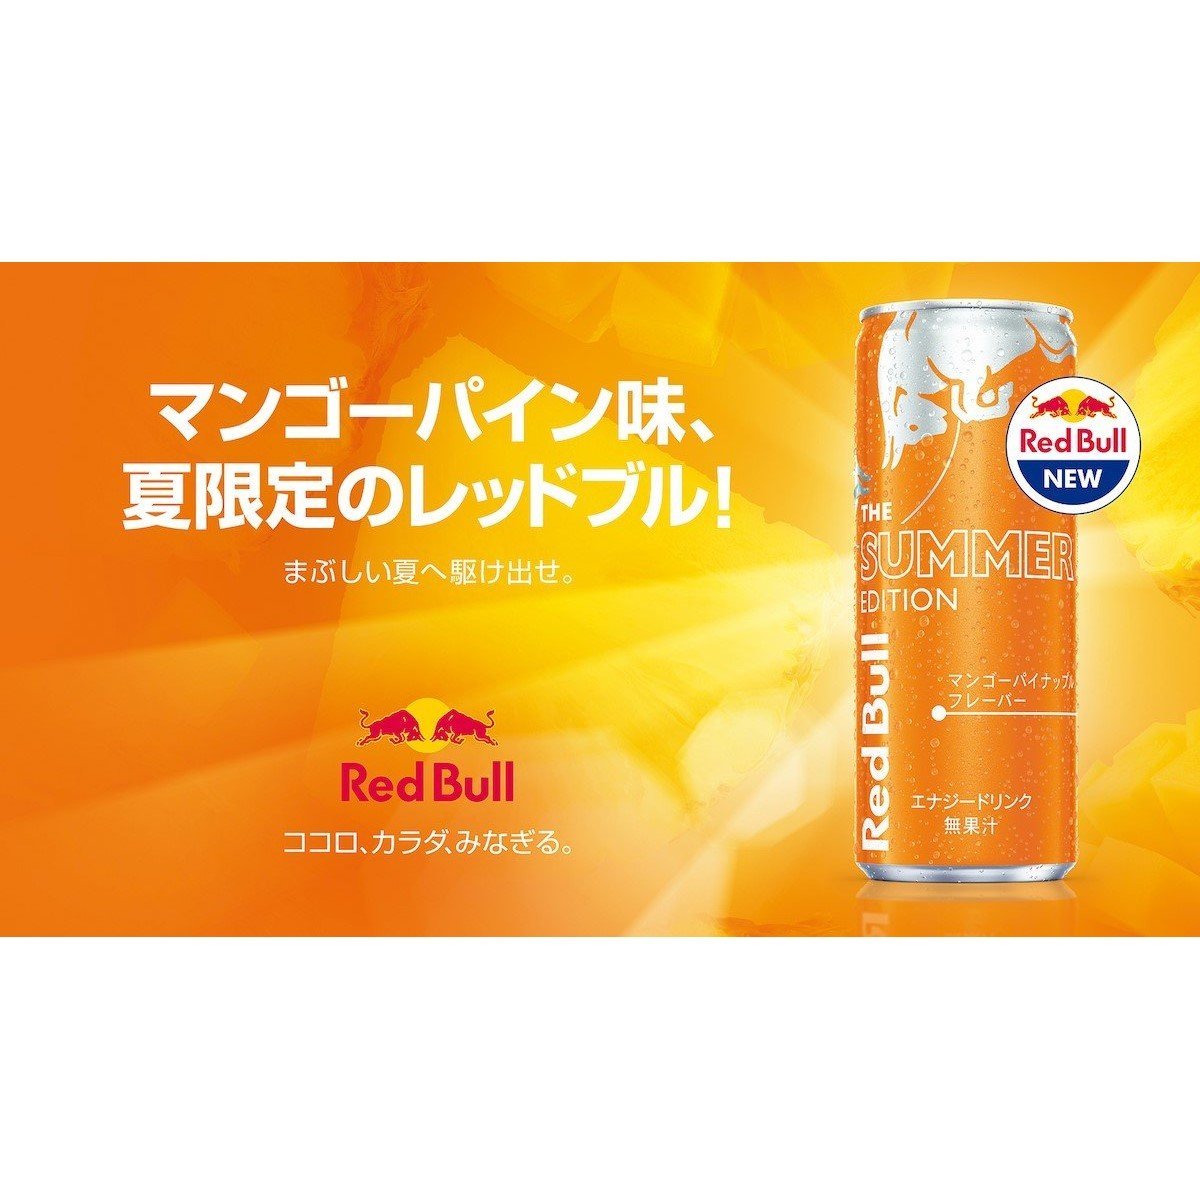 Wholesale Pack Red Bull Summer Edition Mango and Pineapple (Japan) 24 x 250ml - Candy Mail UK